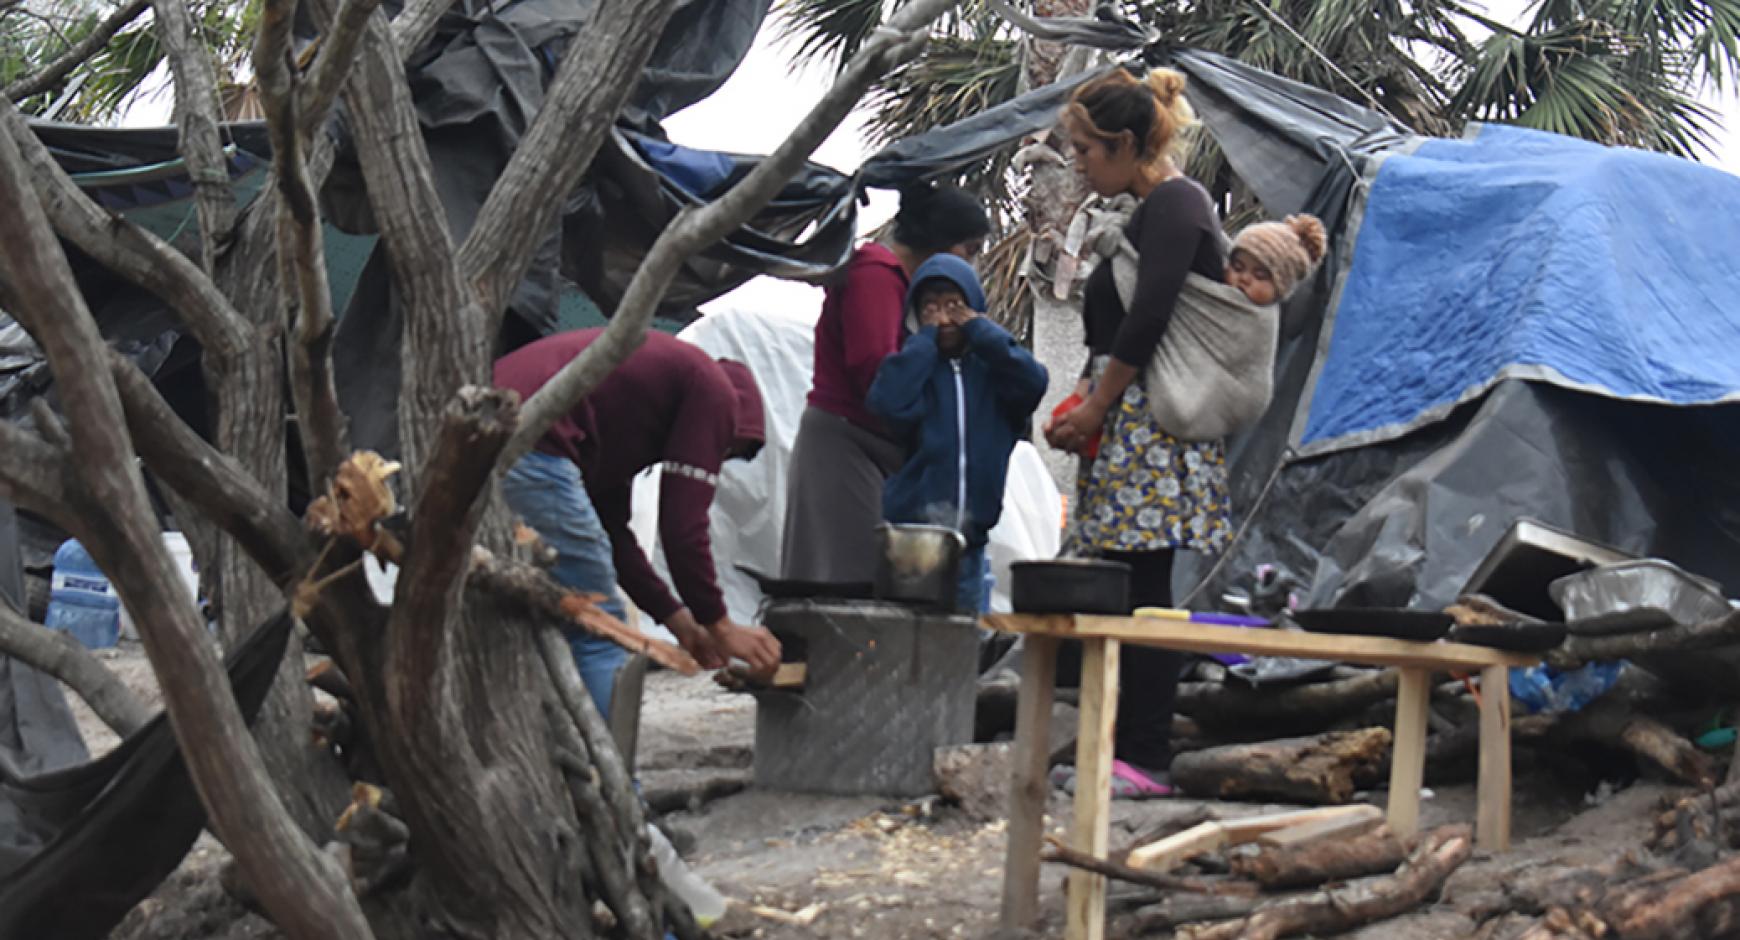 woman with child in refugee camp surrounded by tents and working men